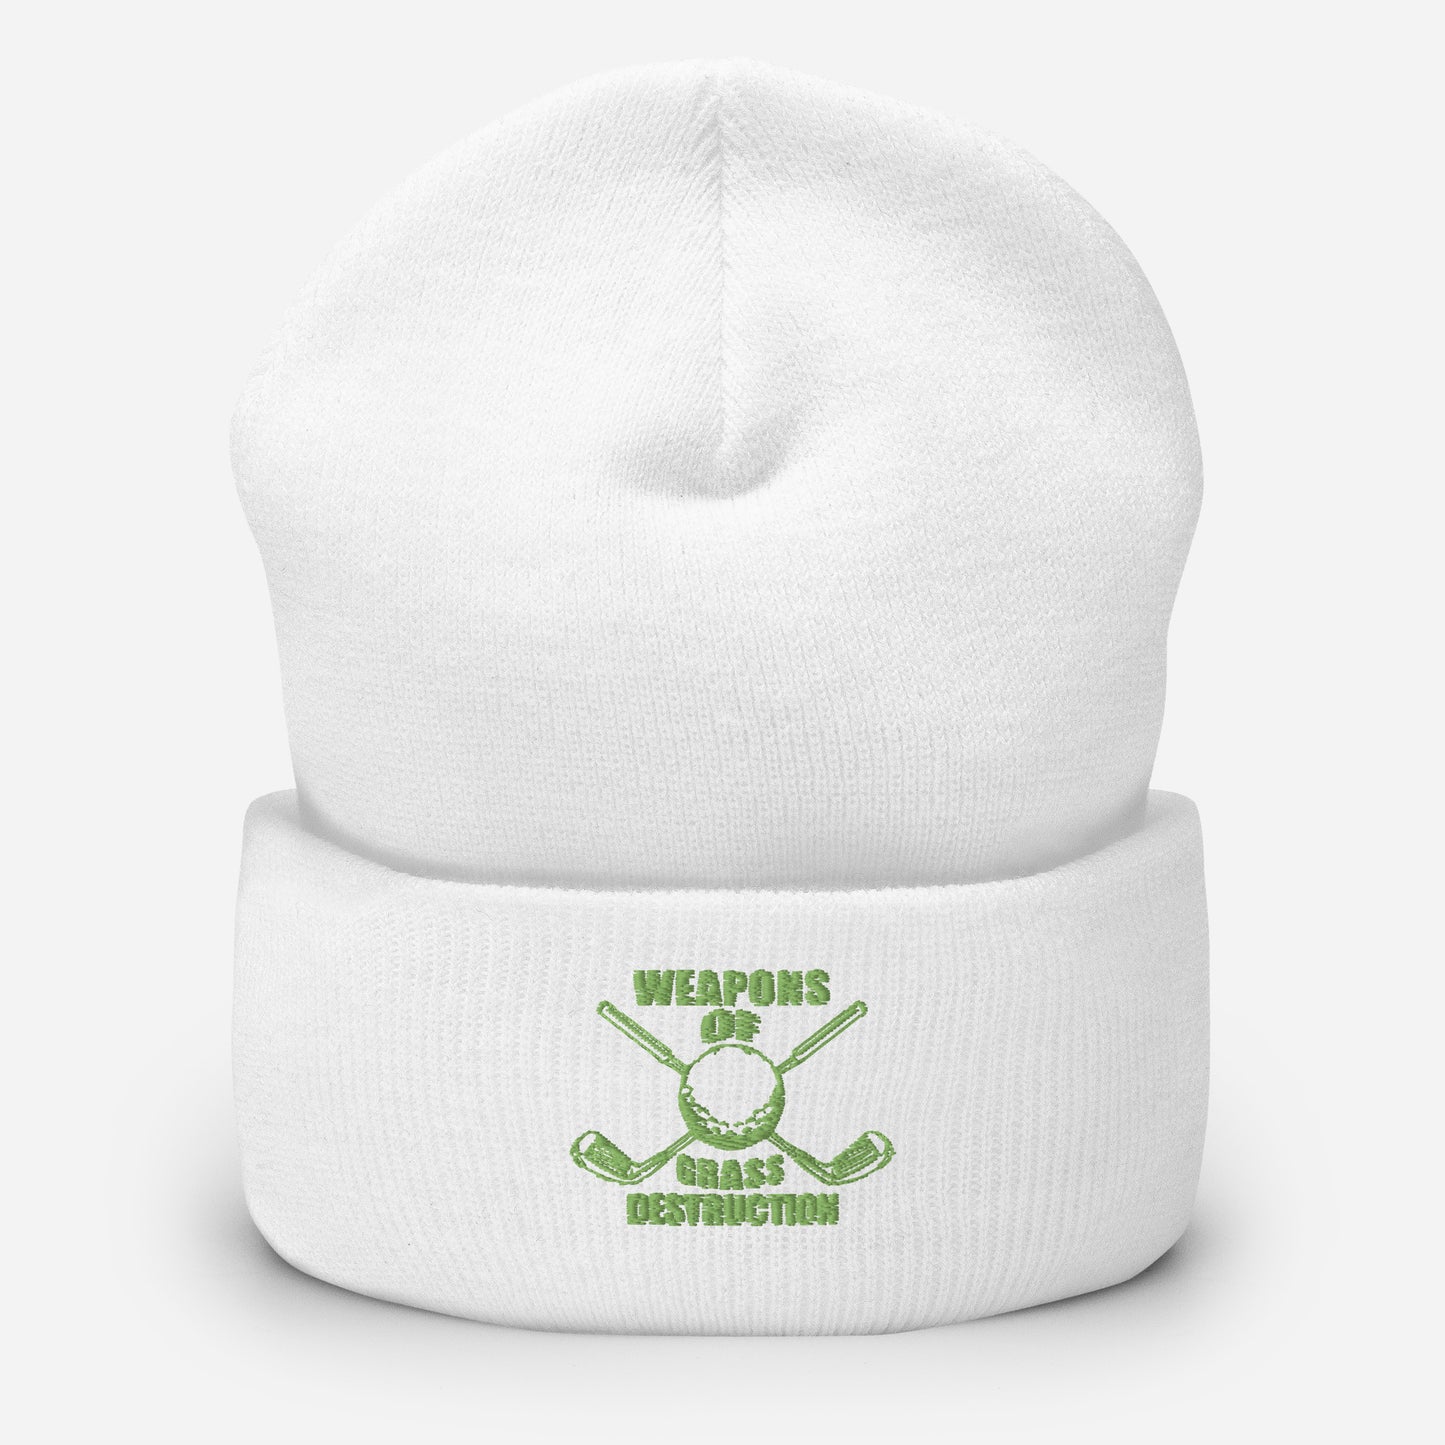 Weapons of Grass Destruction Beanie (Green Lettering)